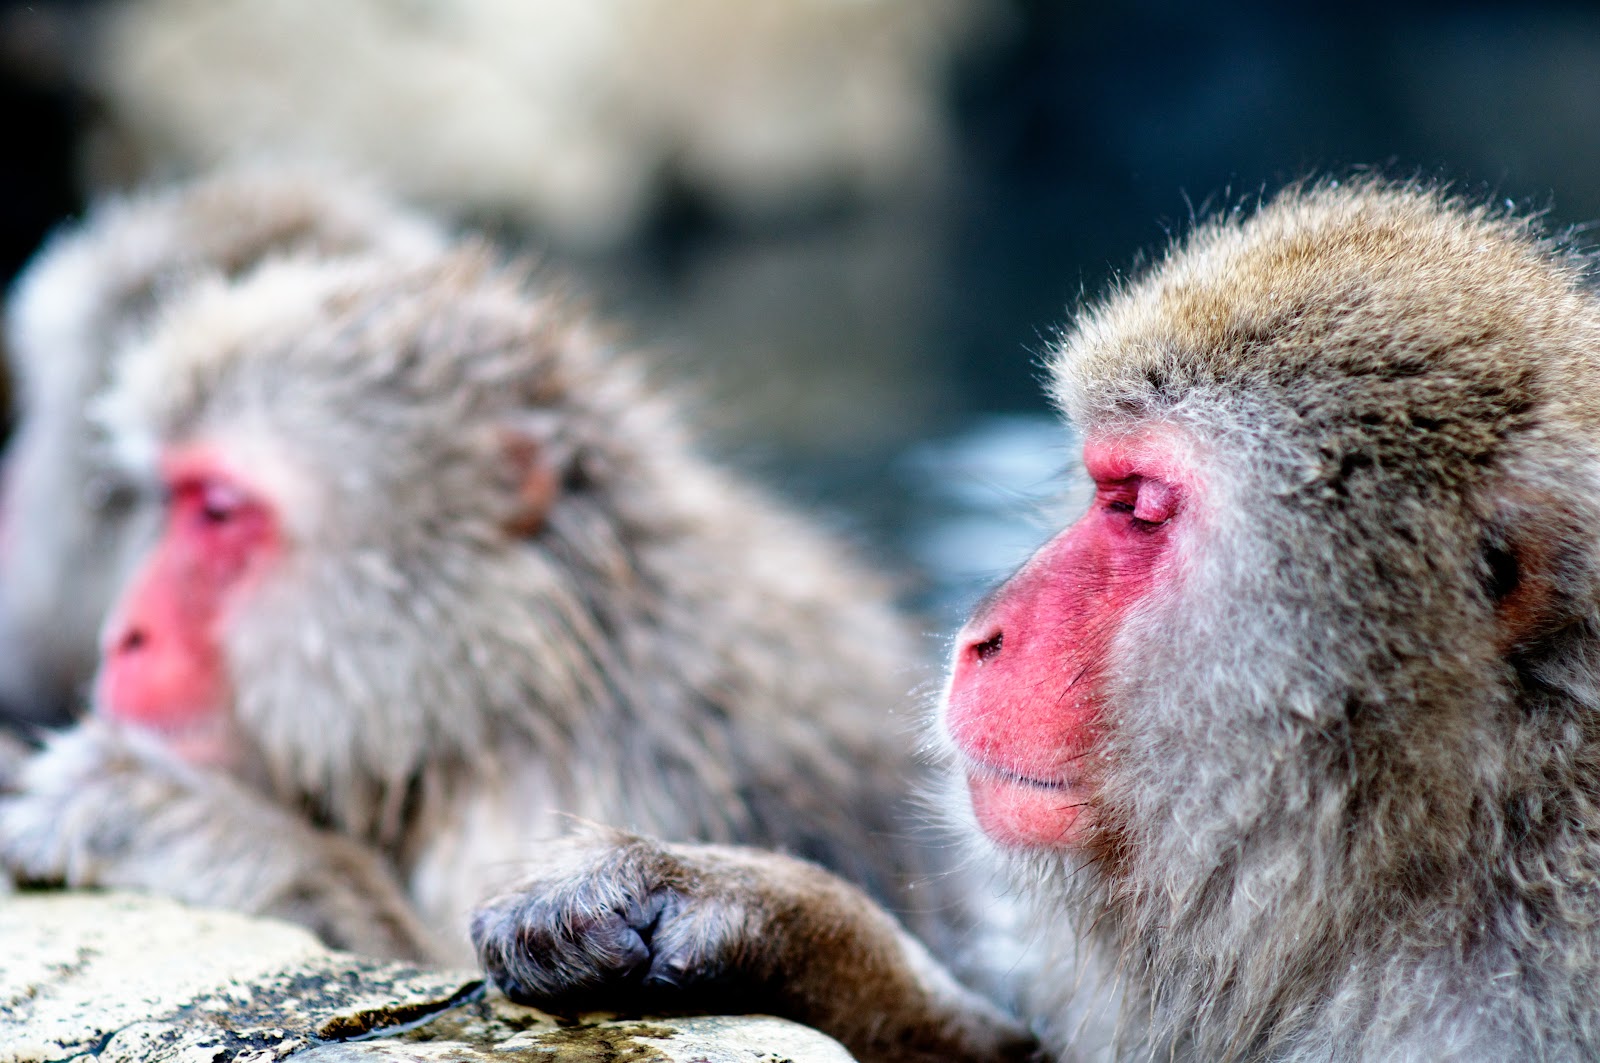 File:Japanese Macaque Fuscata Image 357.jpg - Wikimedia Commons